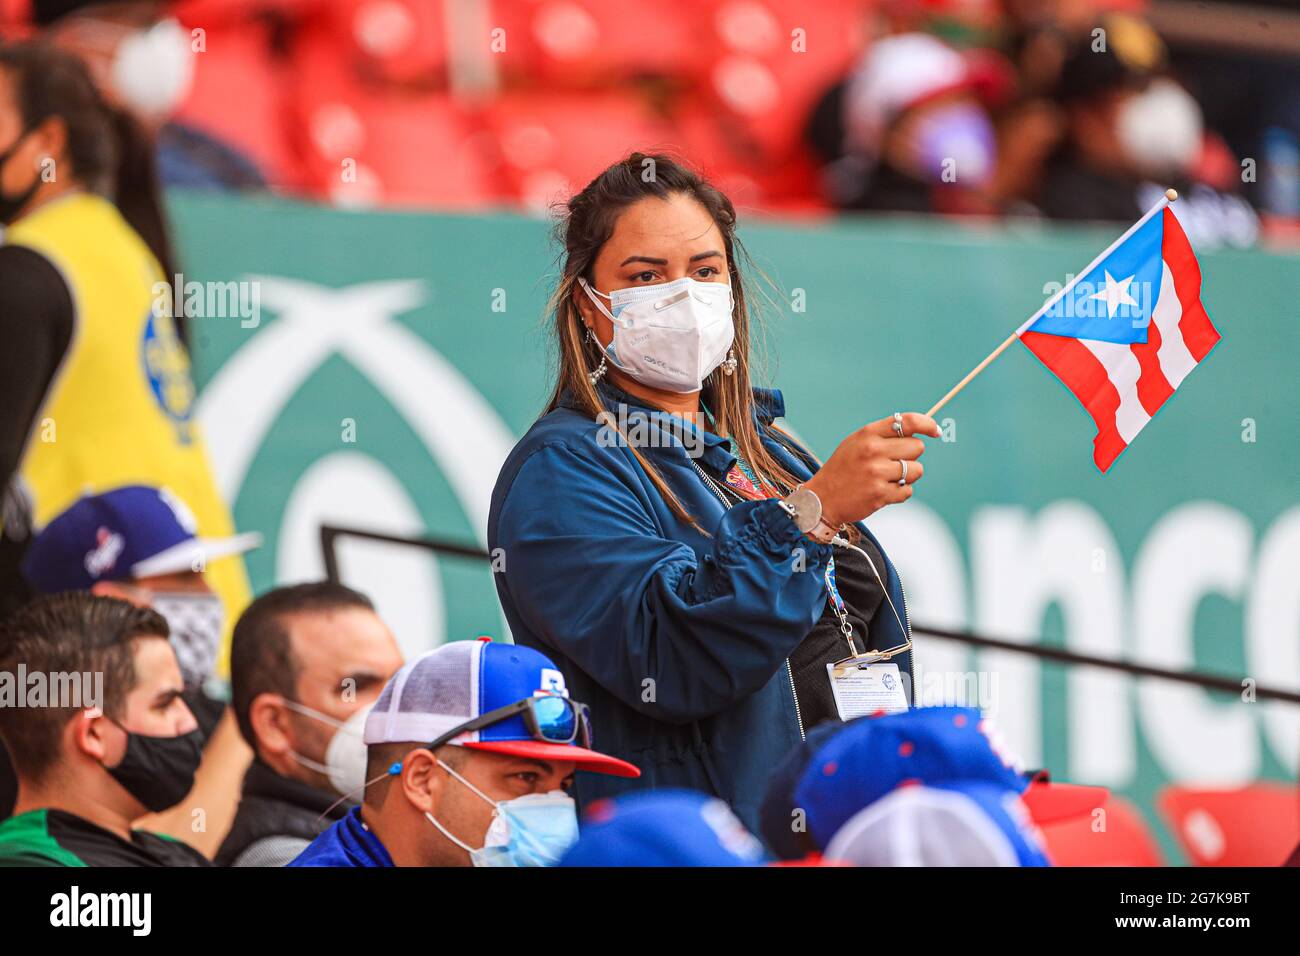 MAZATLAN, MEXICO - JANUARY 31: Puertorican Fans with masks due to Covid 19, during the game between Puerto Rico and Dominican Republic as part of Serie del Caribe 2021 at Teodoro Mariscal Stadium on January 31, 2021 in Mazatlan, Mexico. (Photo by Luis Gutierrez/Norte Photo/) Stock Photo